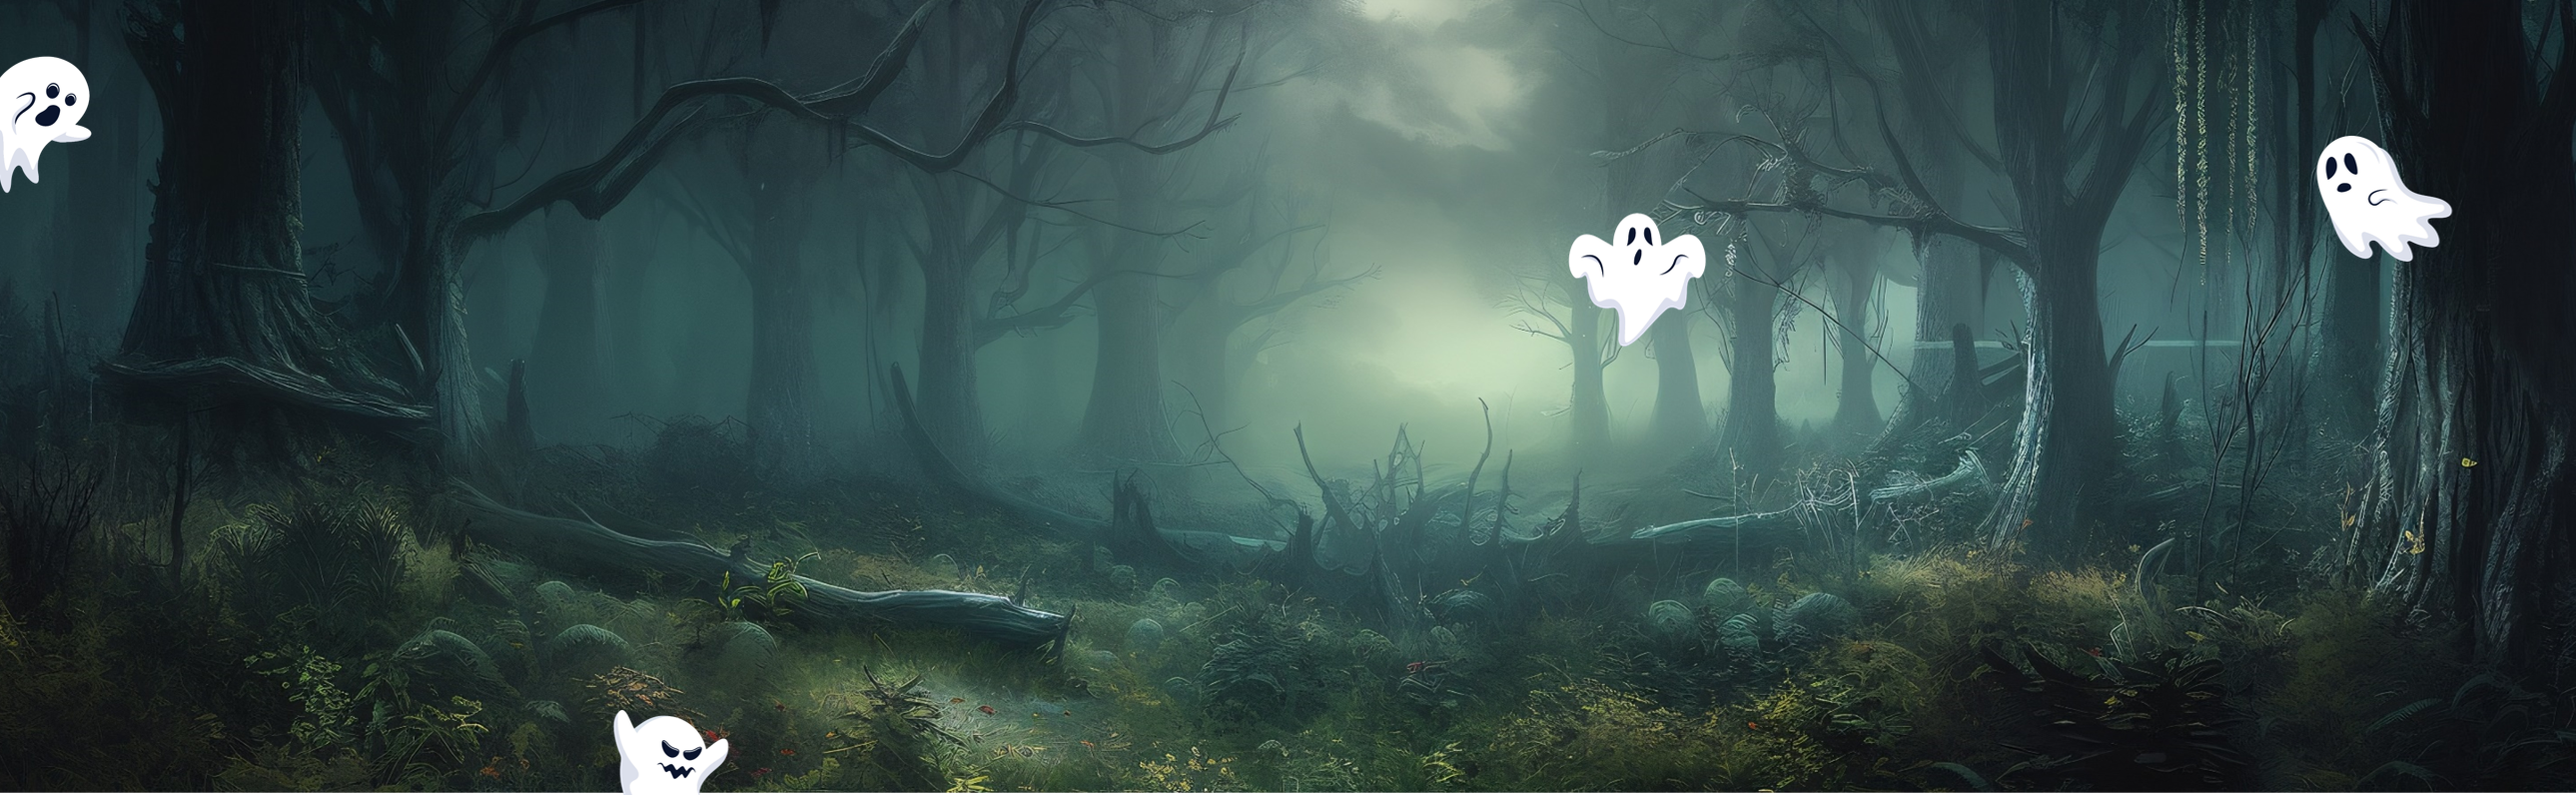 spooky forest with cartoon ghosts